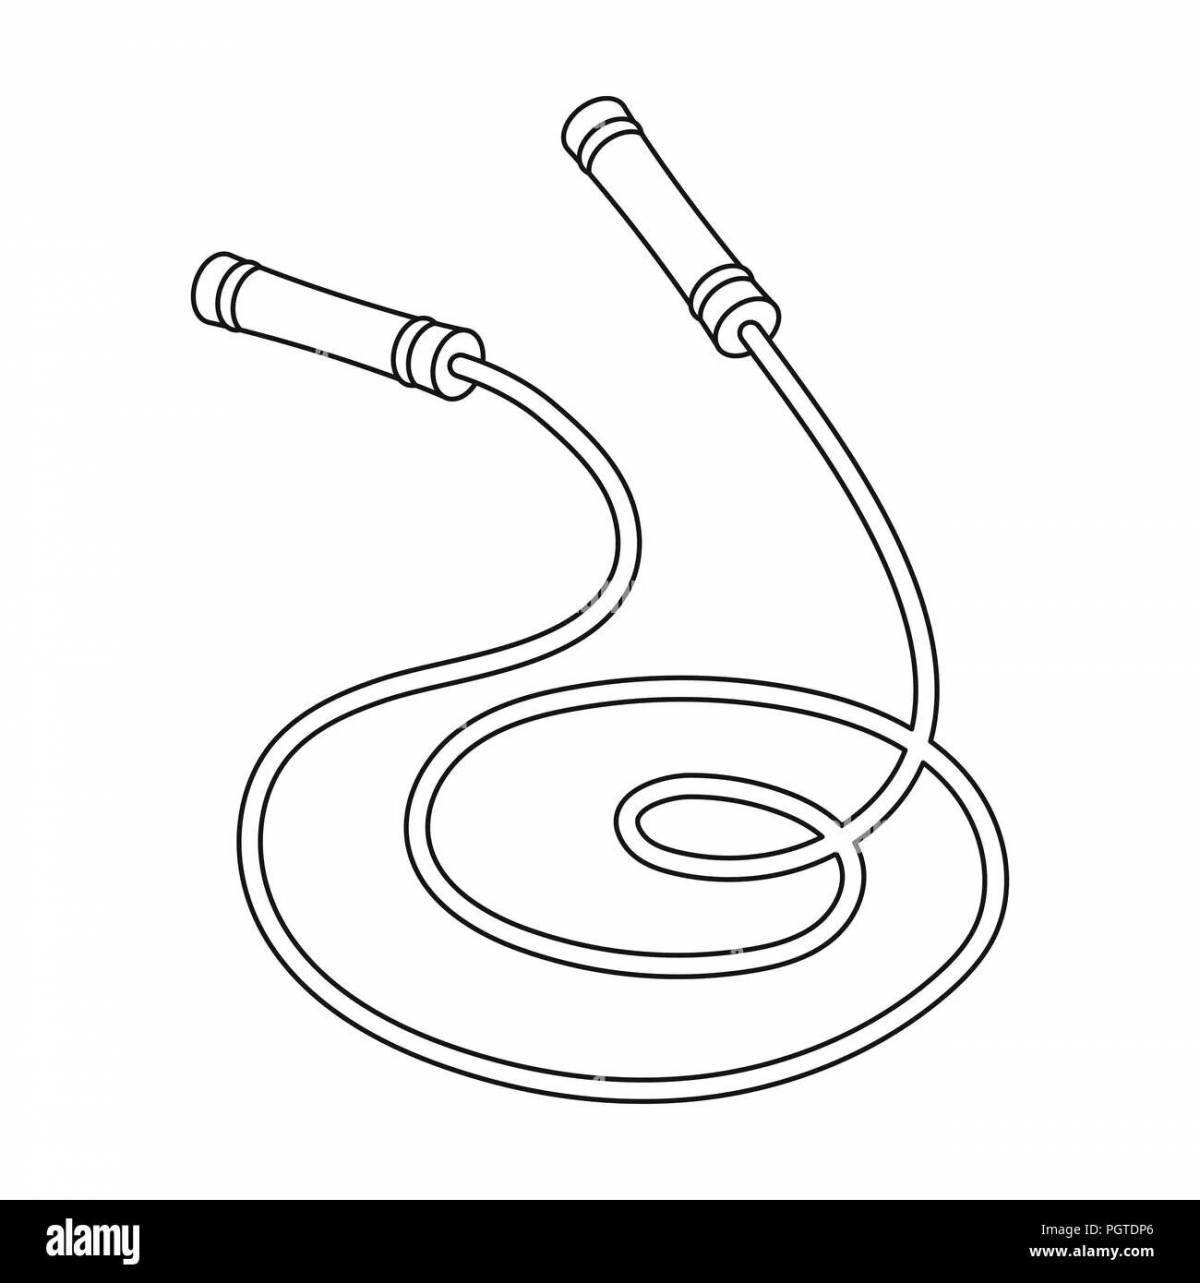 Colorful jump rope coloring page